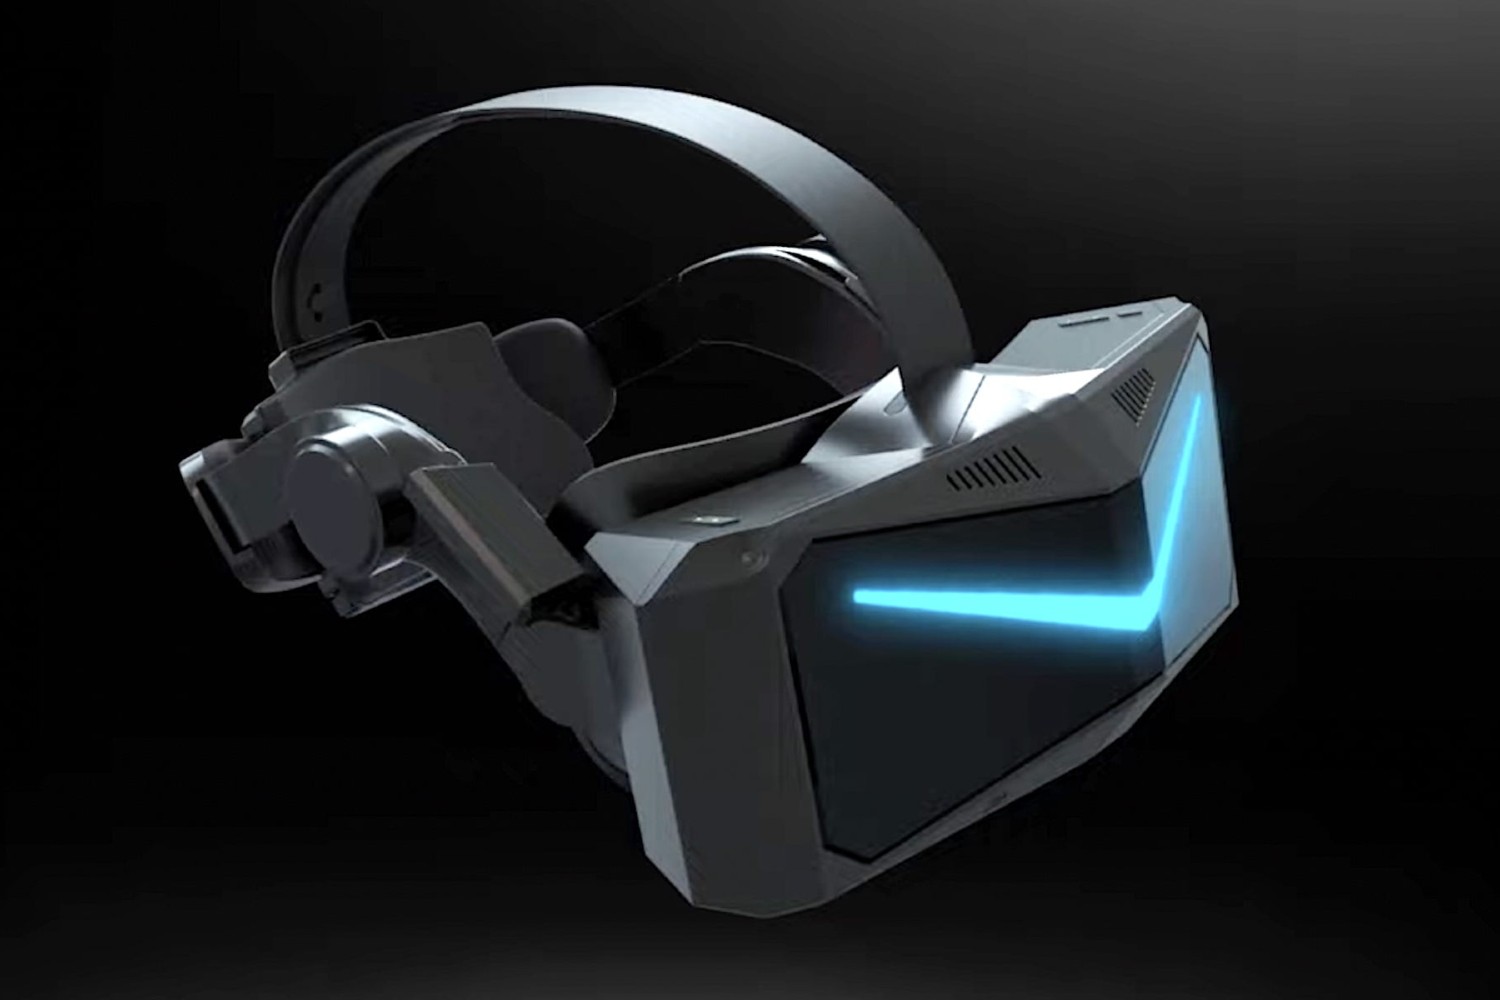 Pimax Crystal VR headset to 'take clarity to another level'